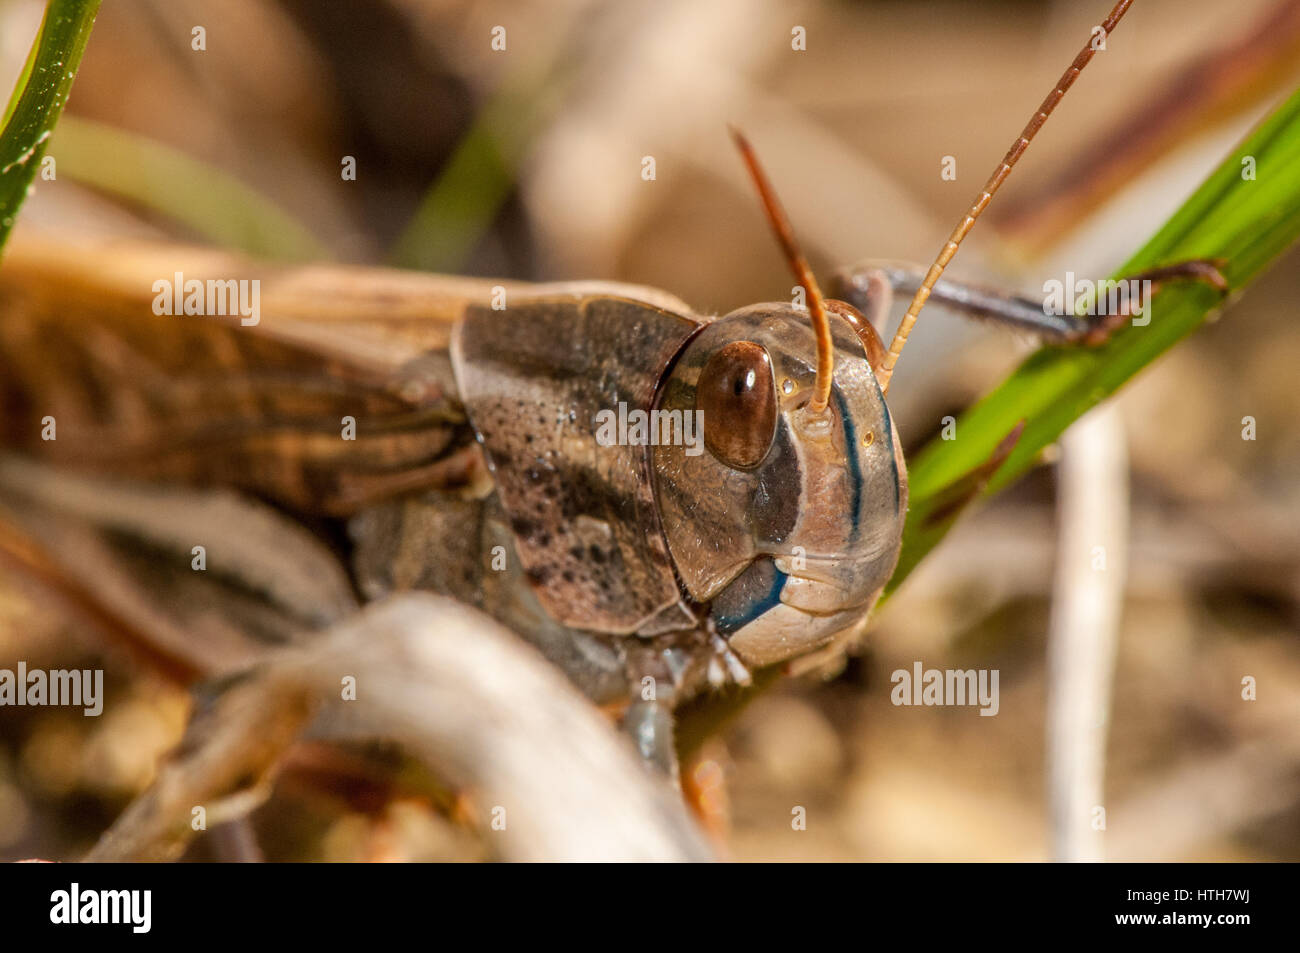 Close up view of an insect (Locusta migratoria cinerascens) Stock Photo